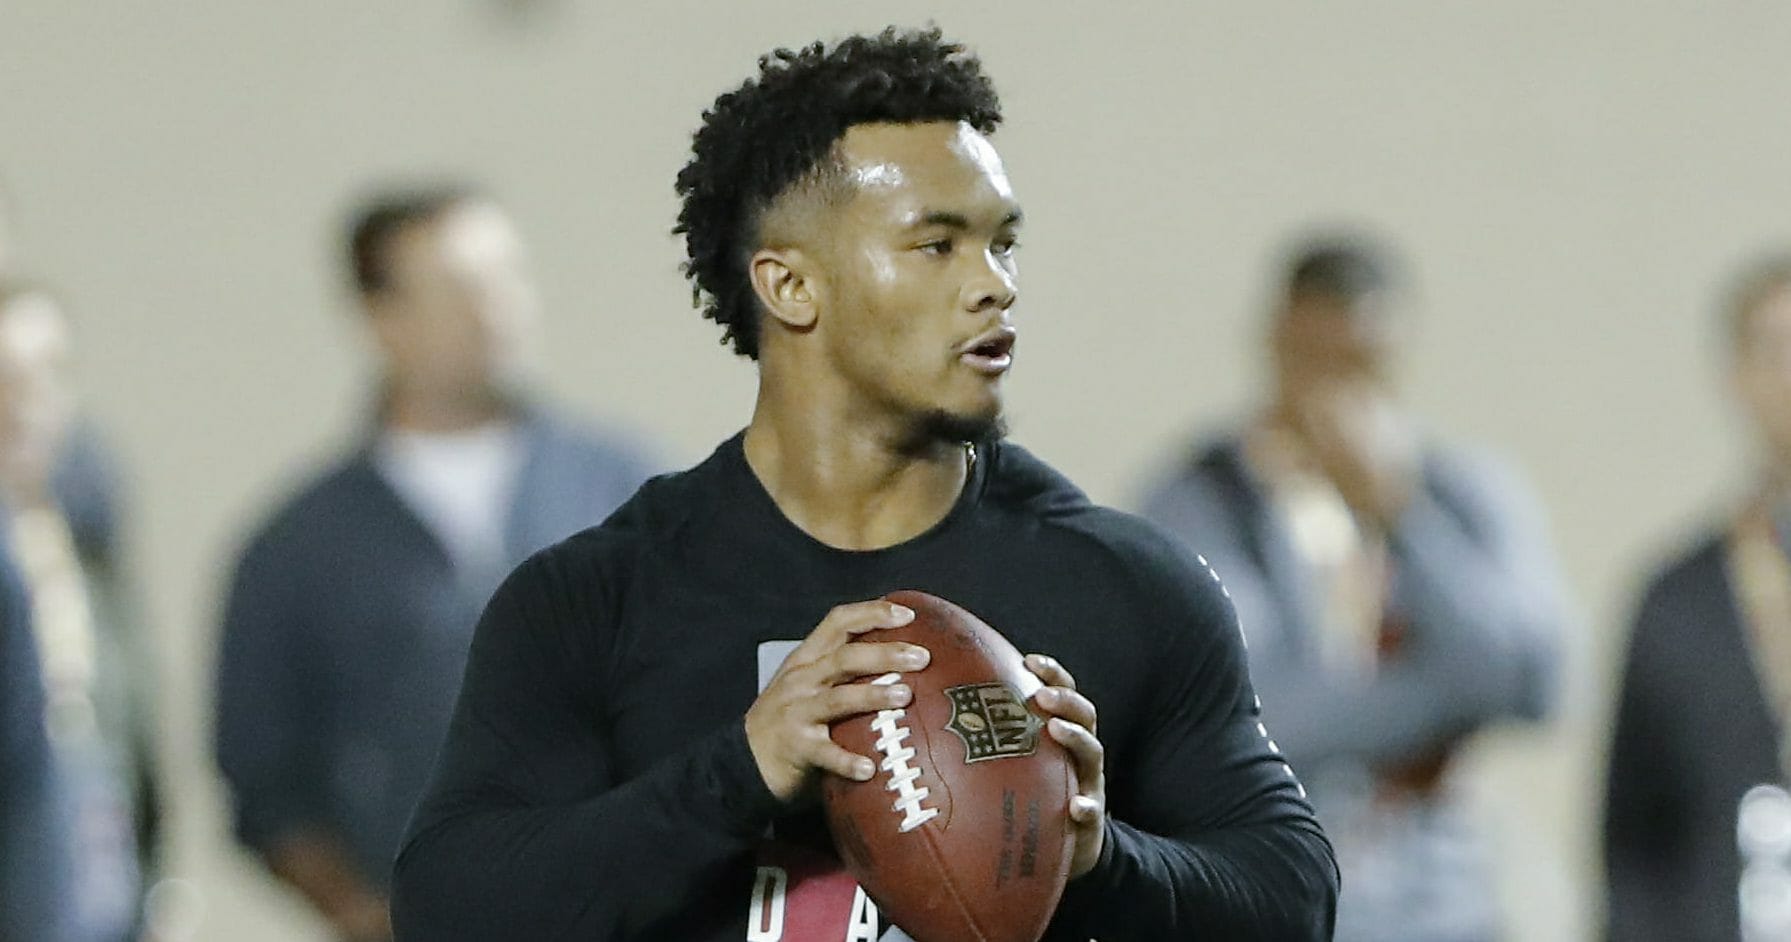 Oklahoma quarterback Kyler Murray goes through passing drills at the university's Pro Day for NFL scouts in Norman on March 13, 2019.